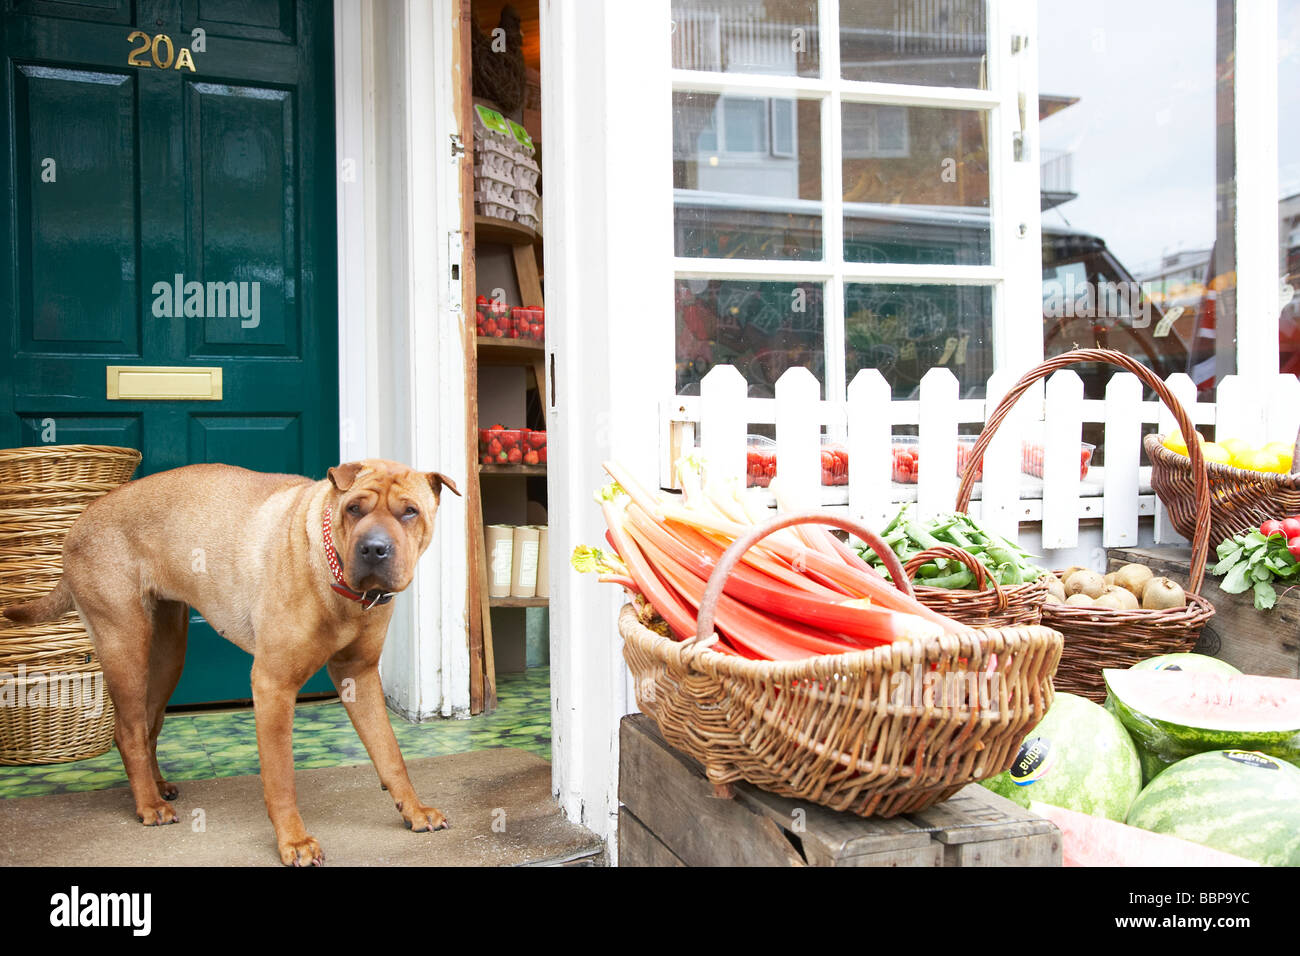 Dog outside a grocers shop Stock Photo